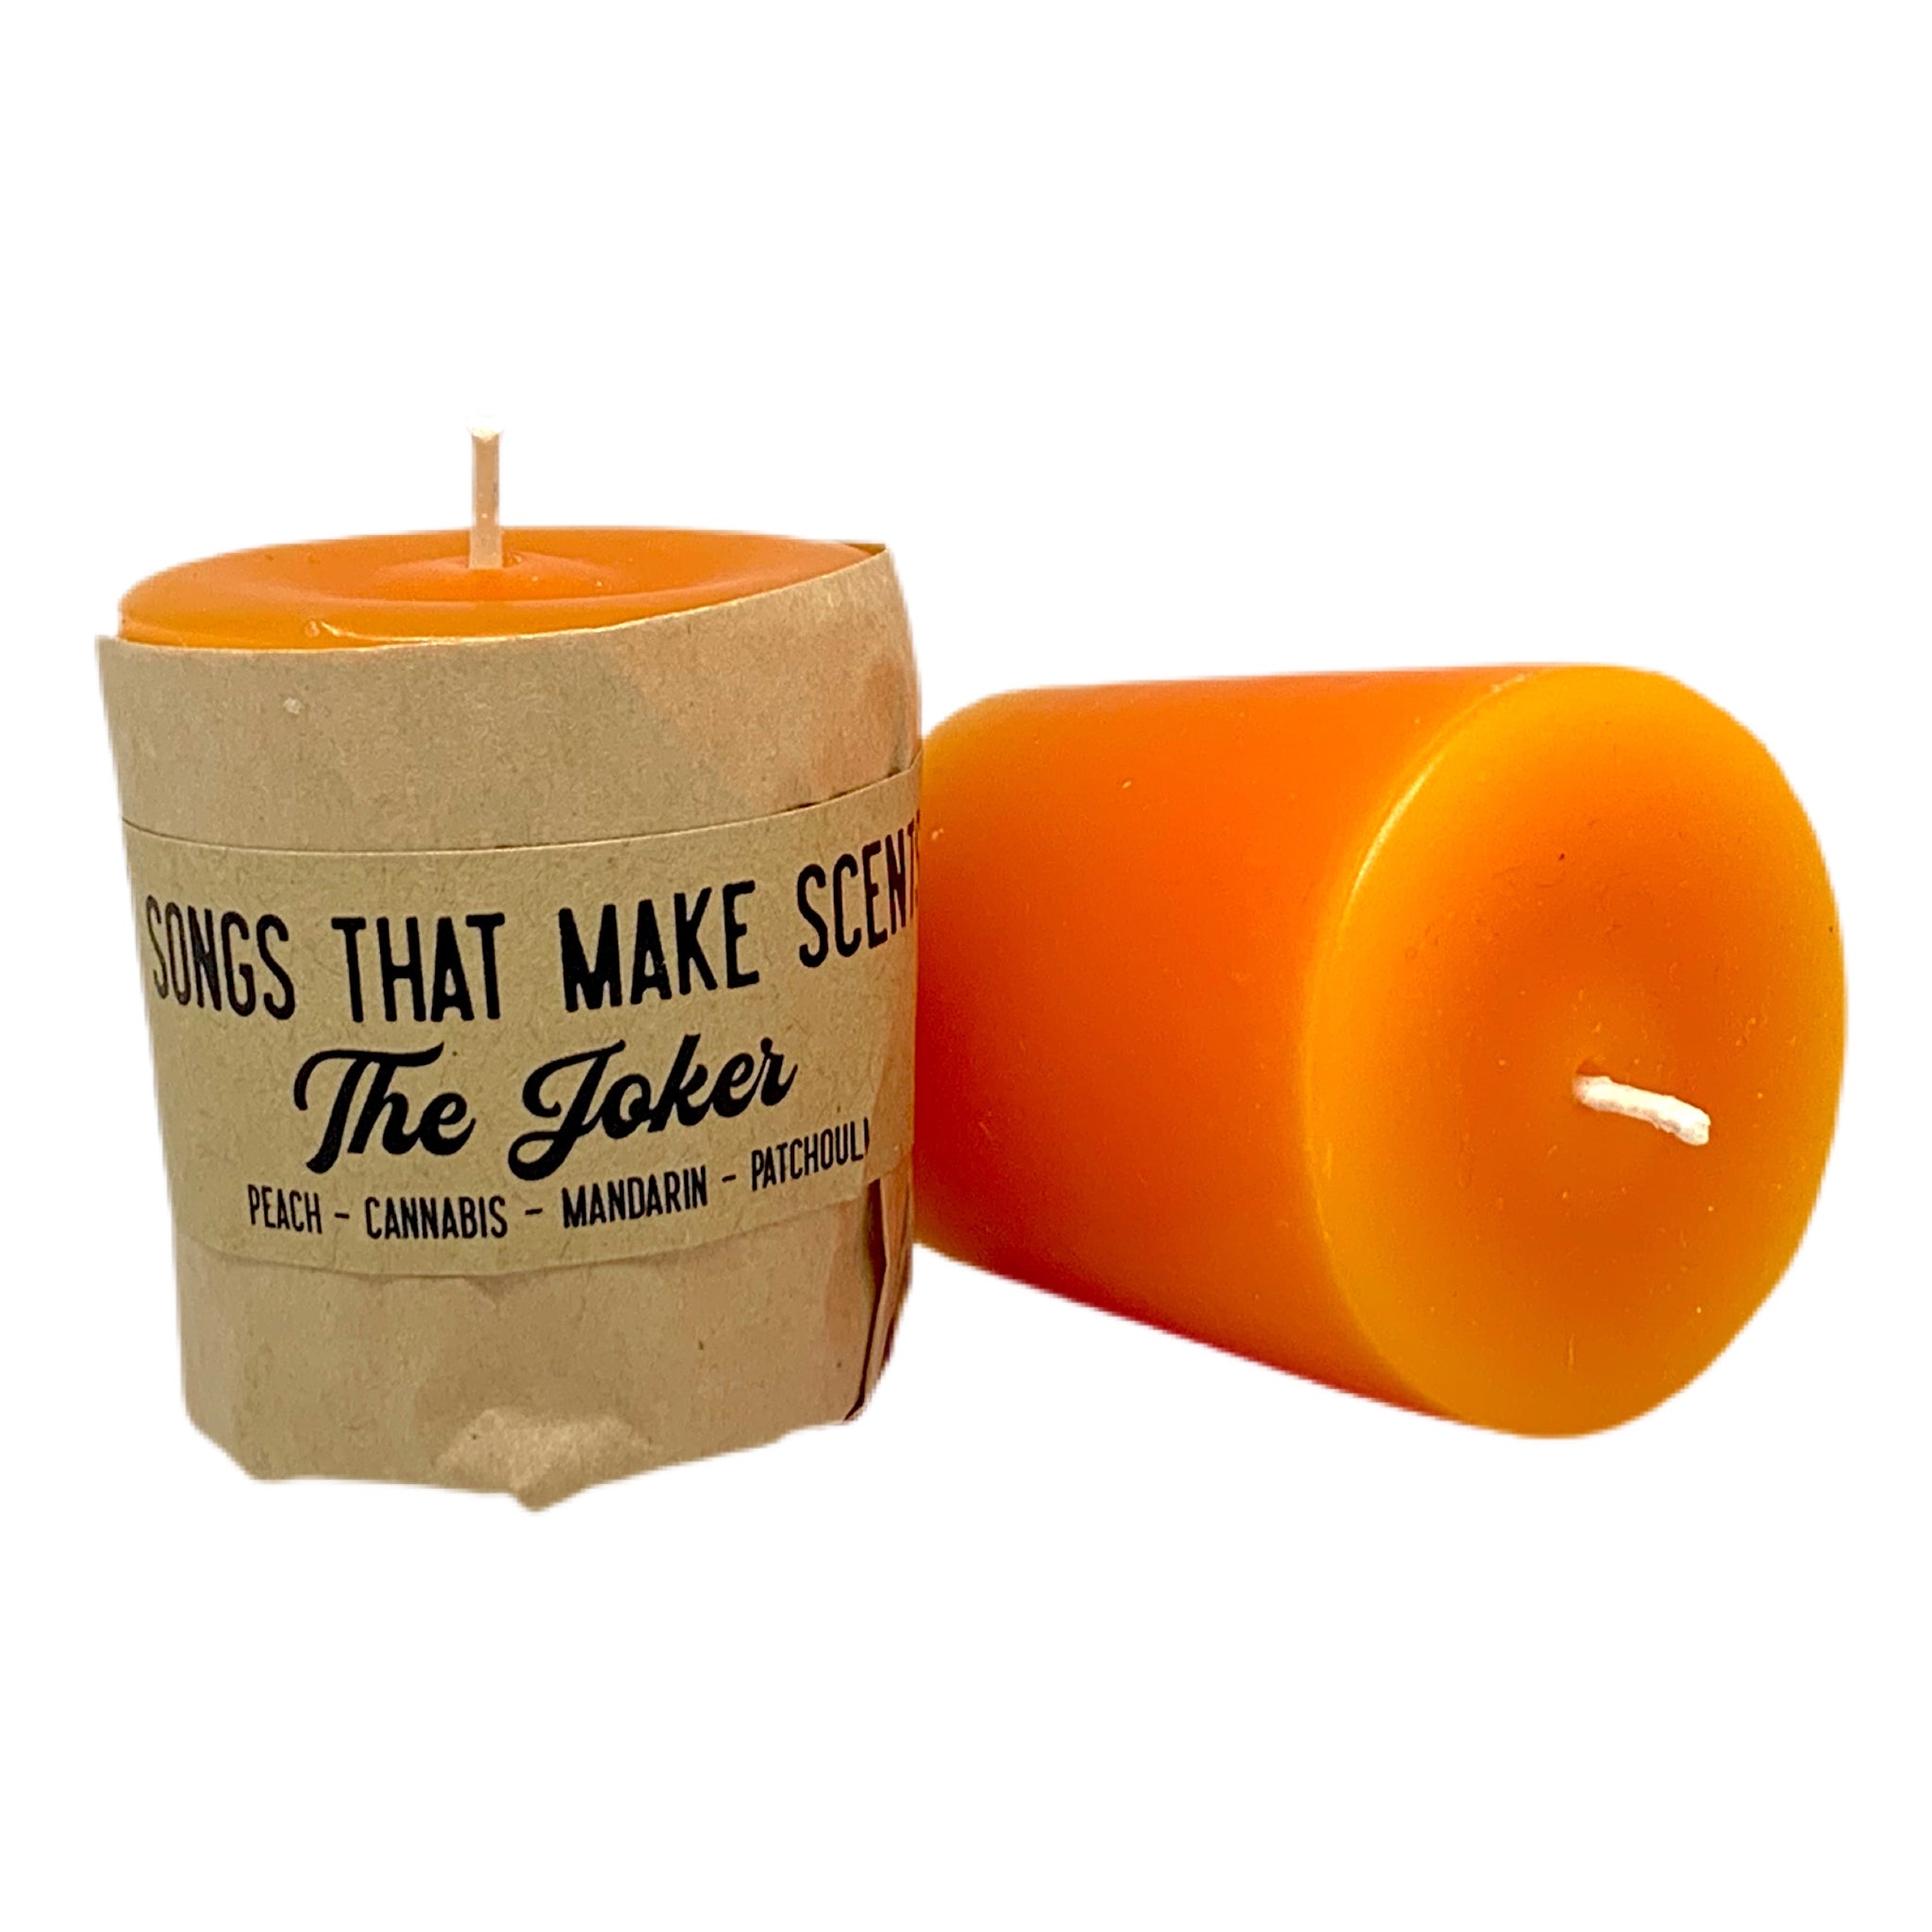 The Joker Scented Votive Candles by Songs That Make Scents